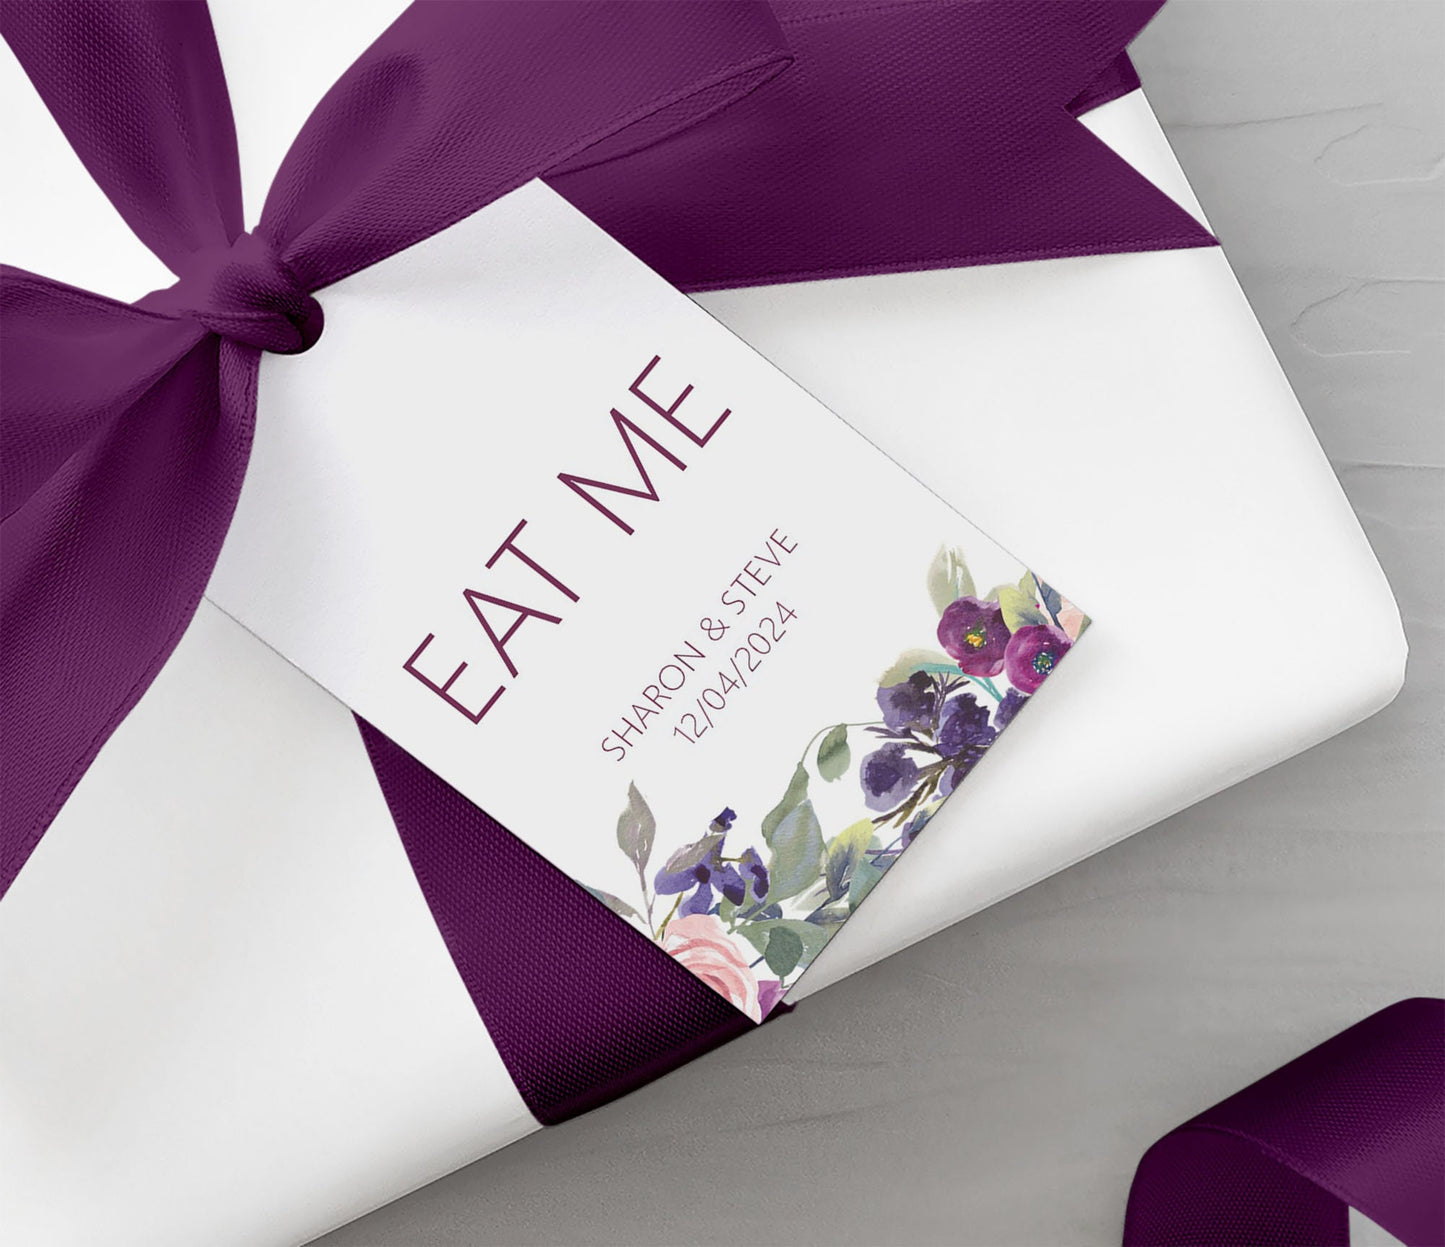 Eat Me Wedding Gift Tags, Purple Floral Personalised Pack Of 10